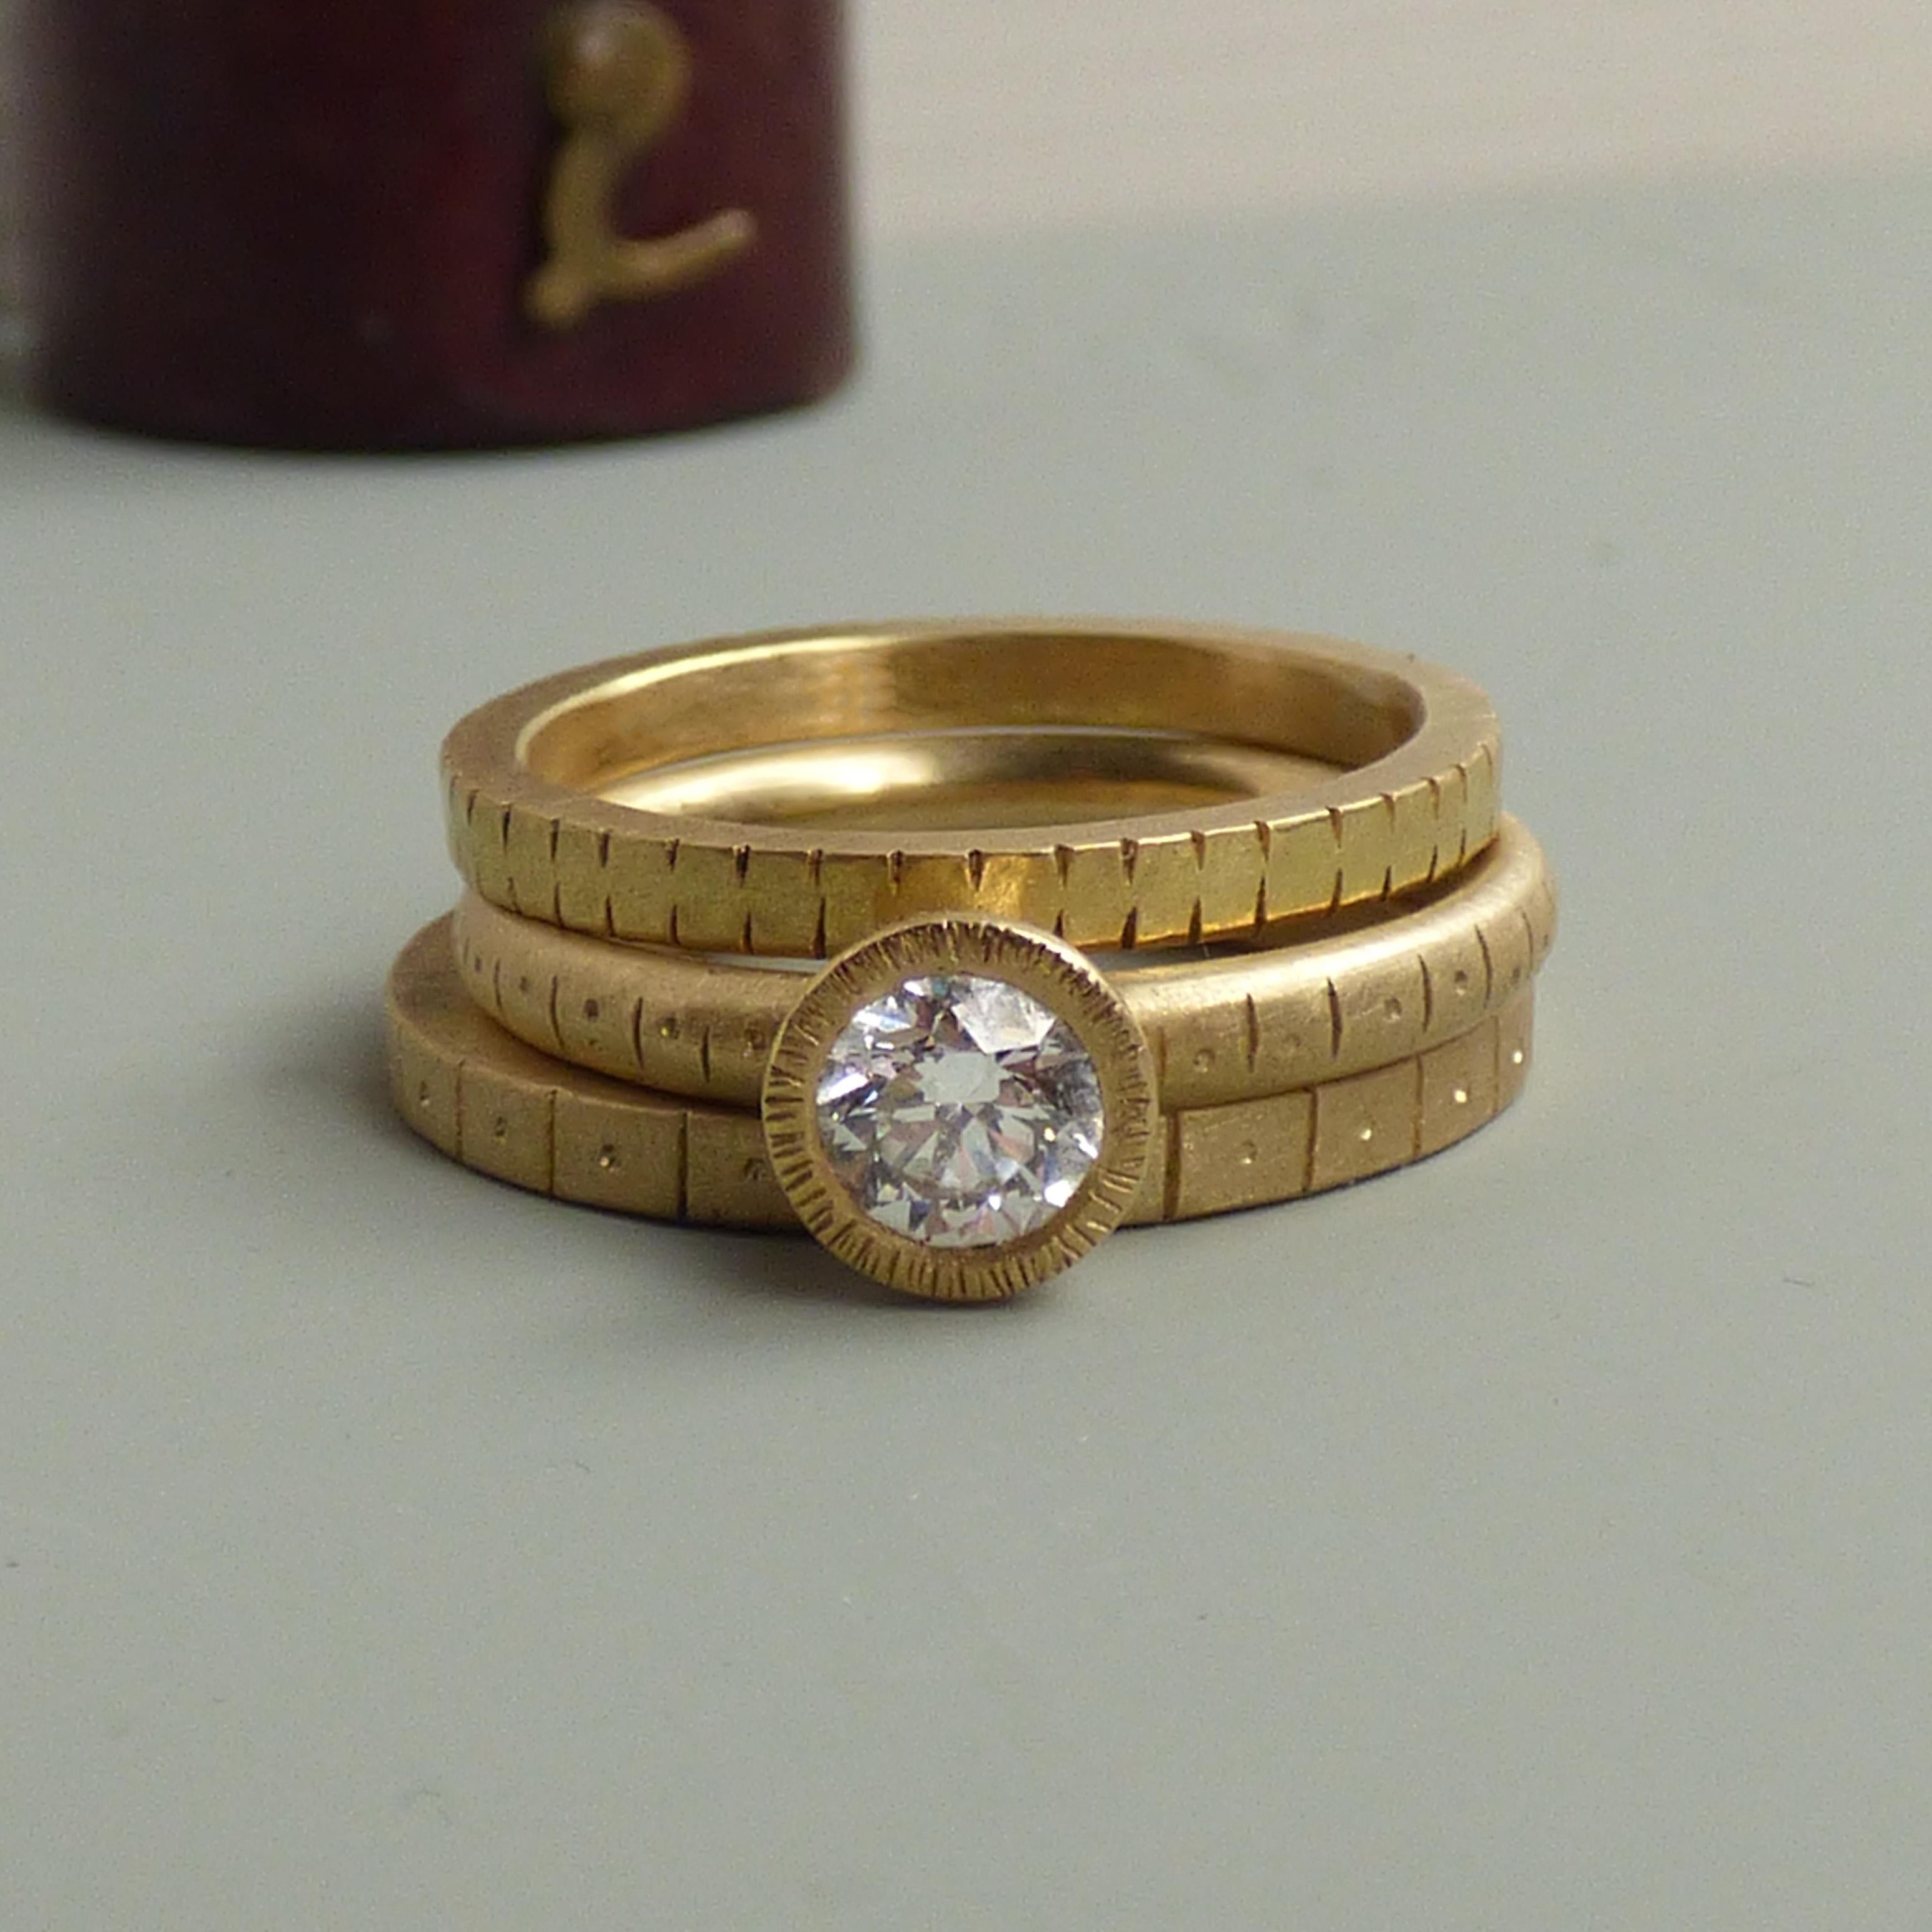 For Sale:  The Callie Ethical Engagement Ring CanadaMark 0.4 carat Diamond 18ct Gold 3